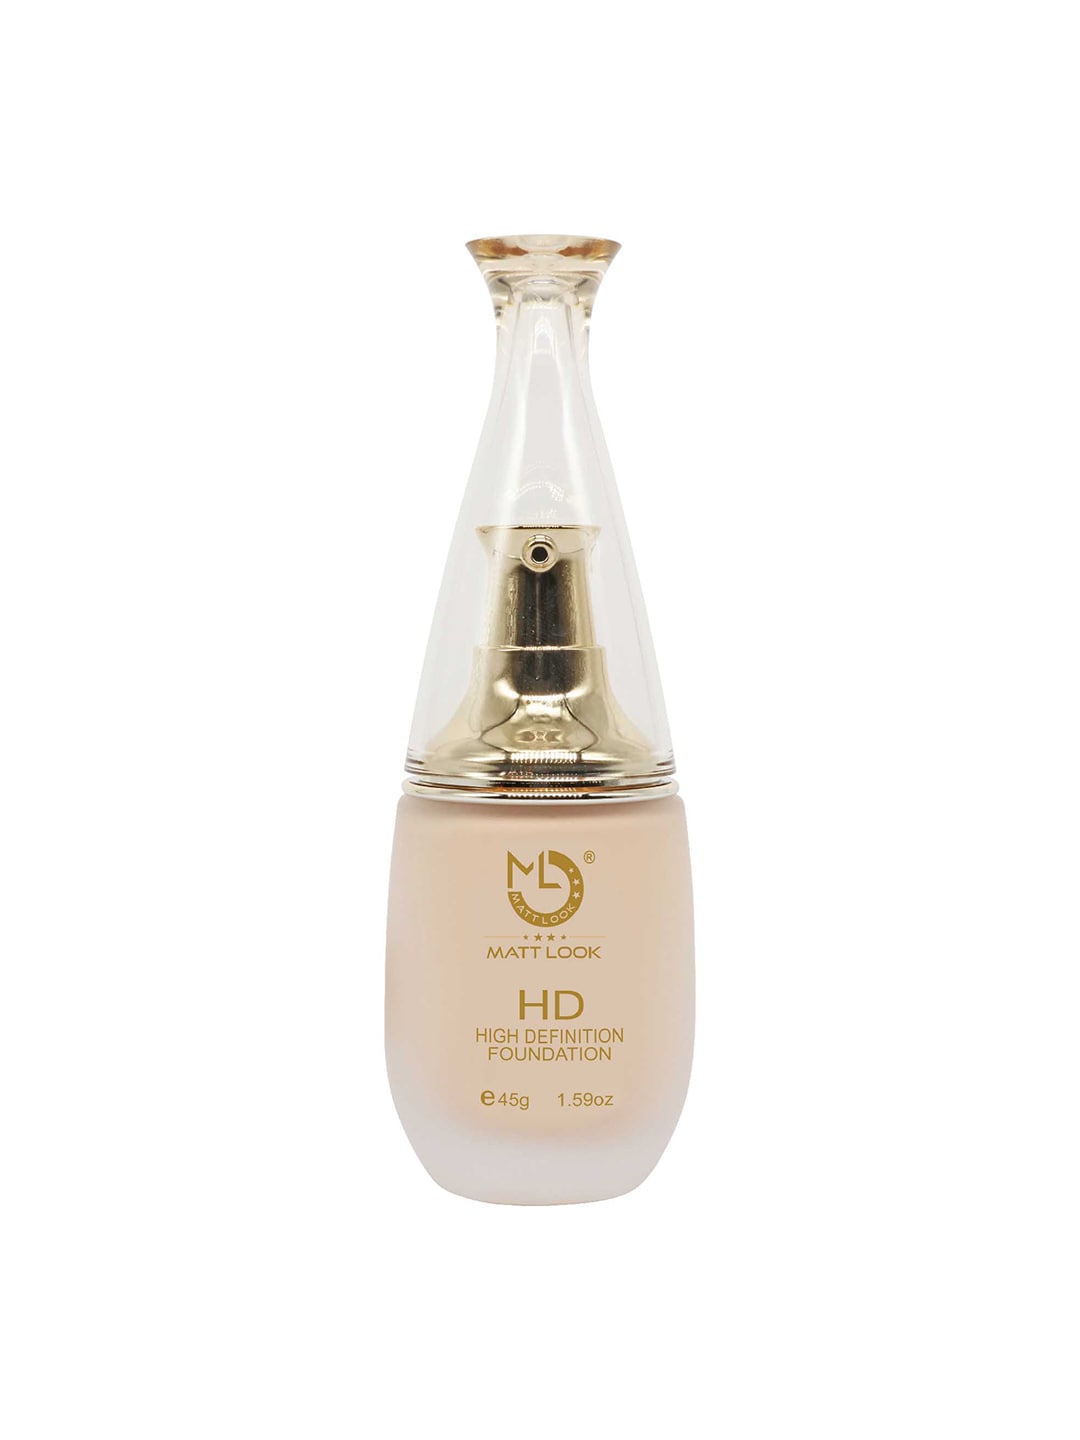 Mattlook White Pearl High Definition Foundation Clean with Nude Feeling, 45gm Price in India